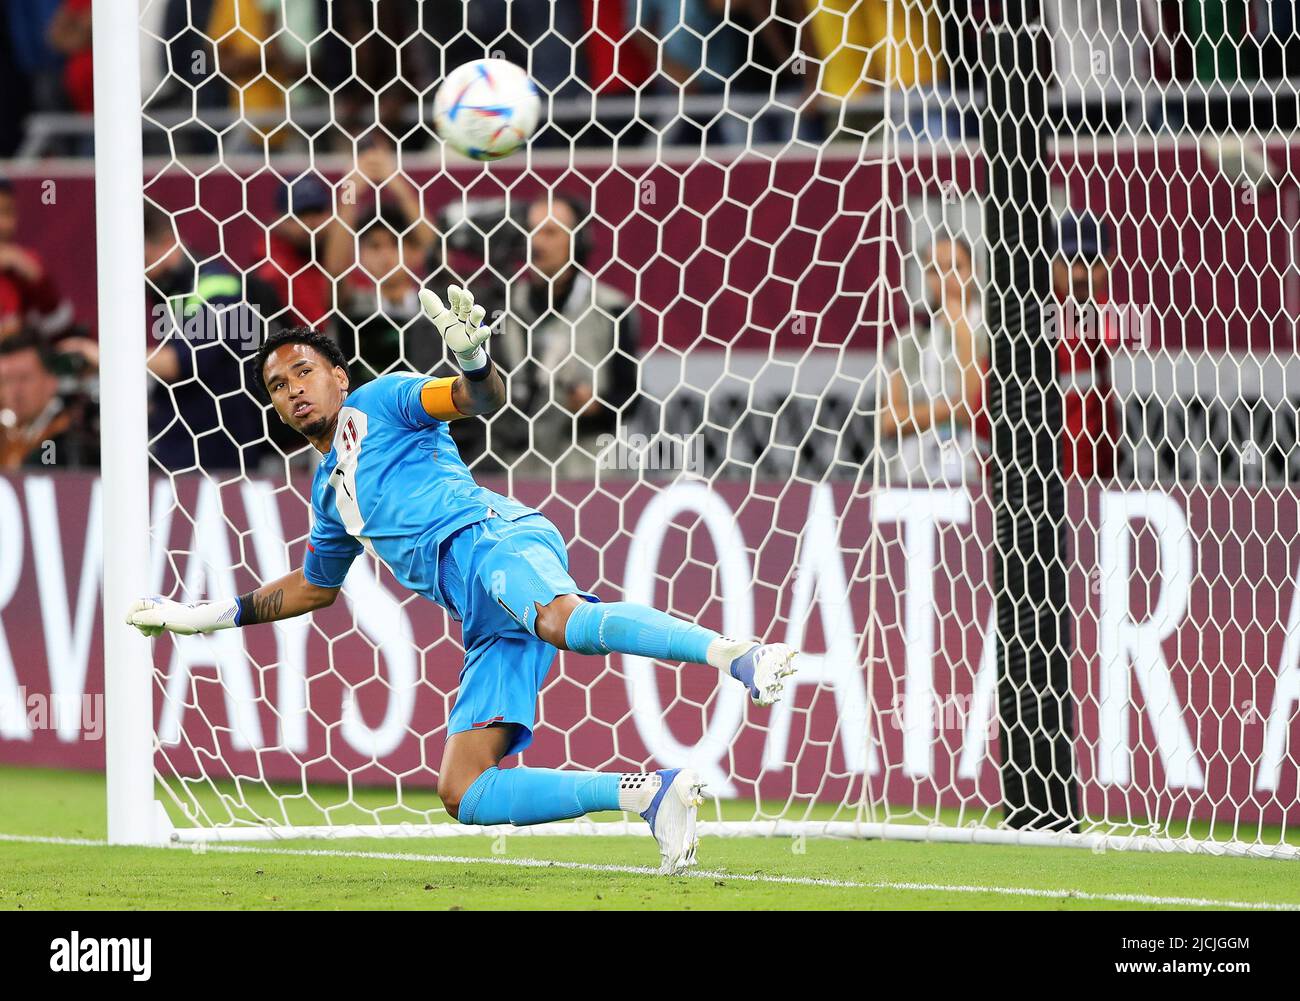 Doha, Qatar. 13th June, 2022. Peru's goalkeeper Pedro Gallese fails to save the ball in the penalty shootout during the FIFA World Cup 2022 intercontinental play-offs match between Australia and Peru at the Ahmed bin Ali Stadium, Doha, Qatar, June 13, 2022. Credit: Wang Dongzhen/Xinhua/Alamy Live News Stock Photo